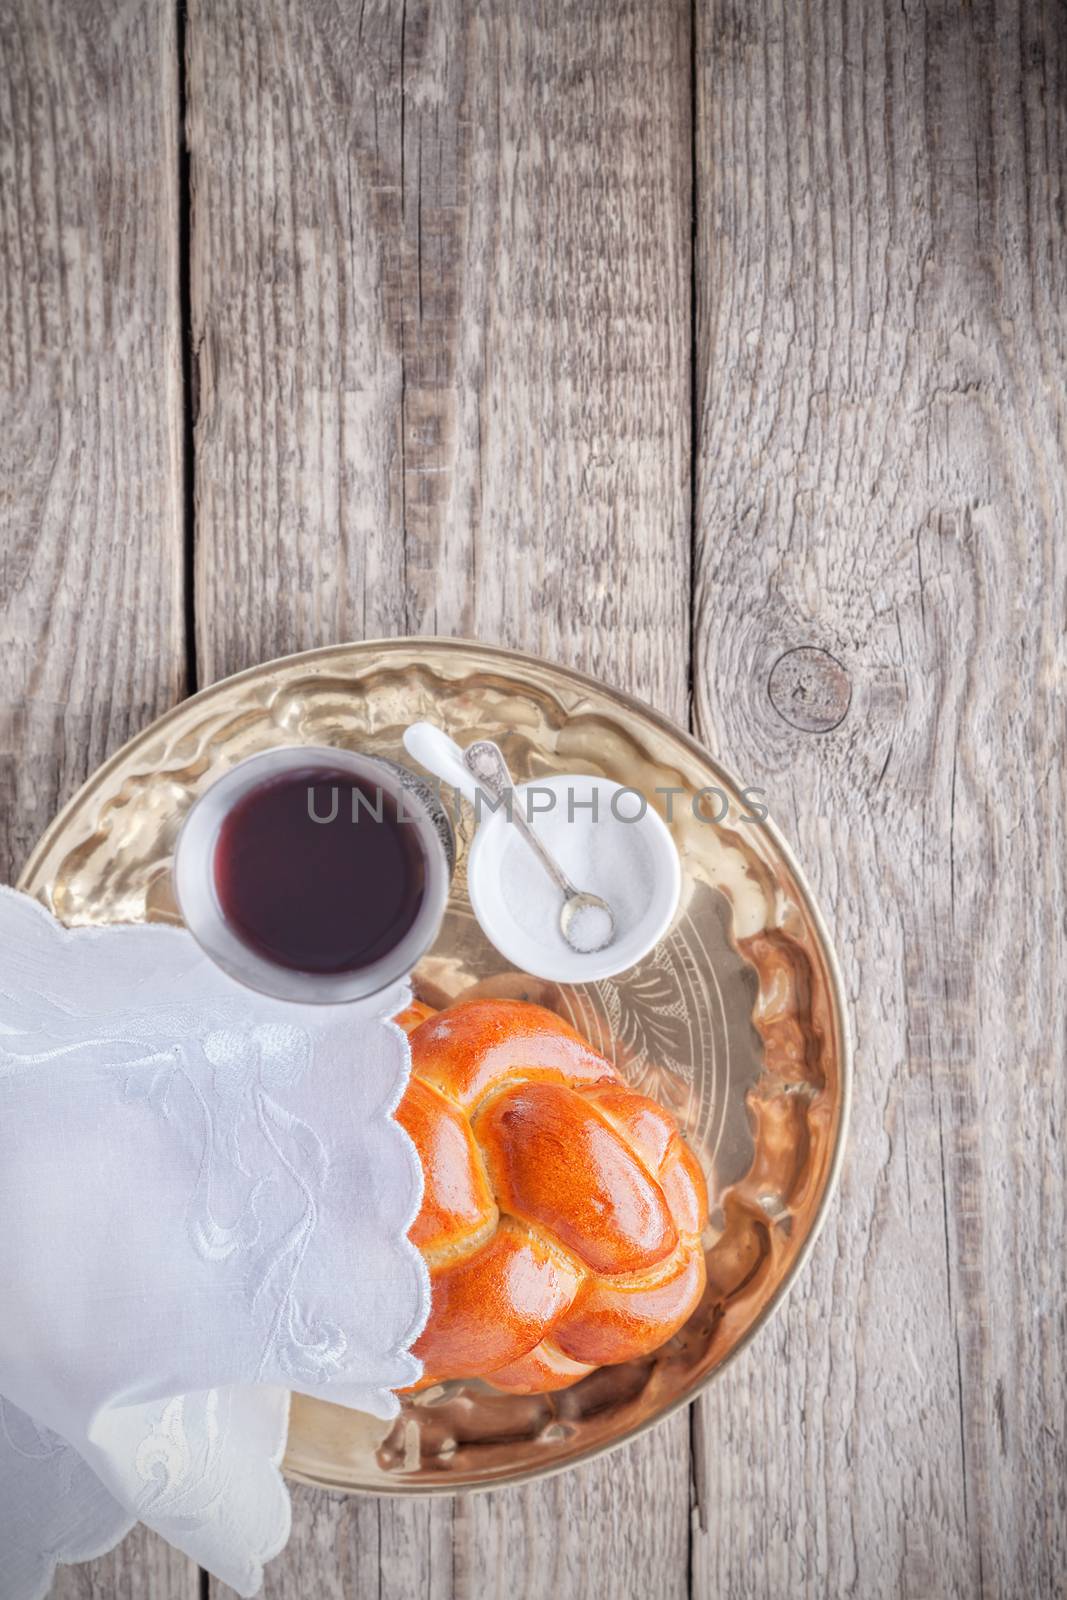 Wine, challah on a wooden surface. Jewish Sabbath by supercat67